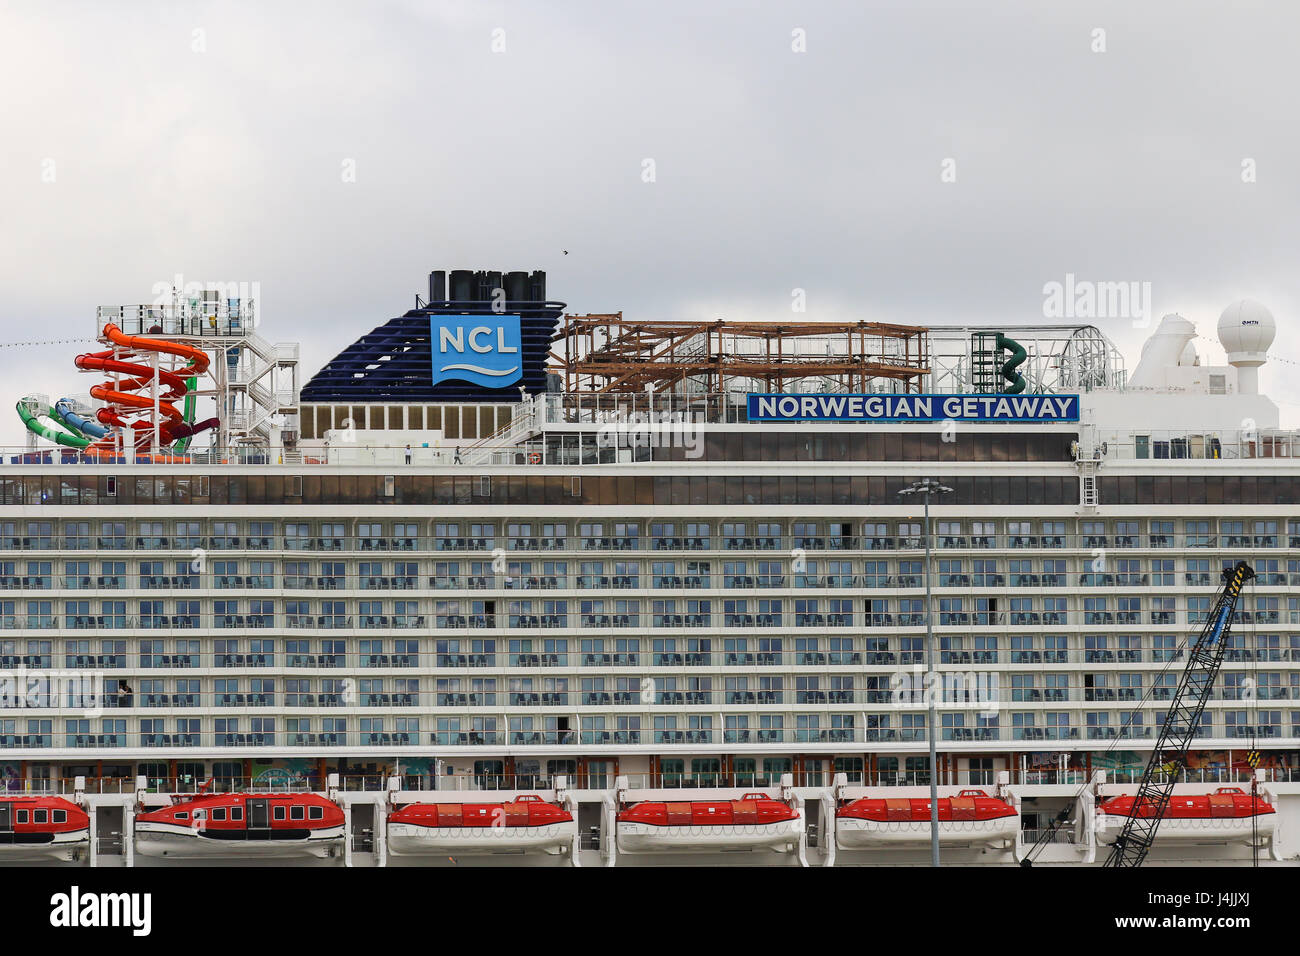 A view of the entertainment aboard the MS Norwegian Getaway of Norwegian Cruise Line in Southampton Port, UK Stock Photo